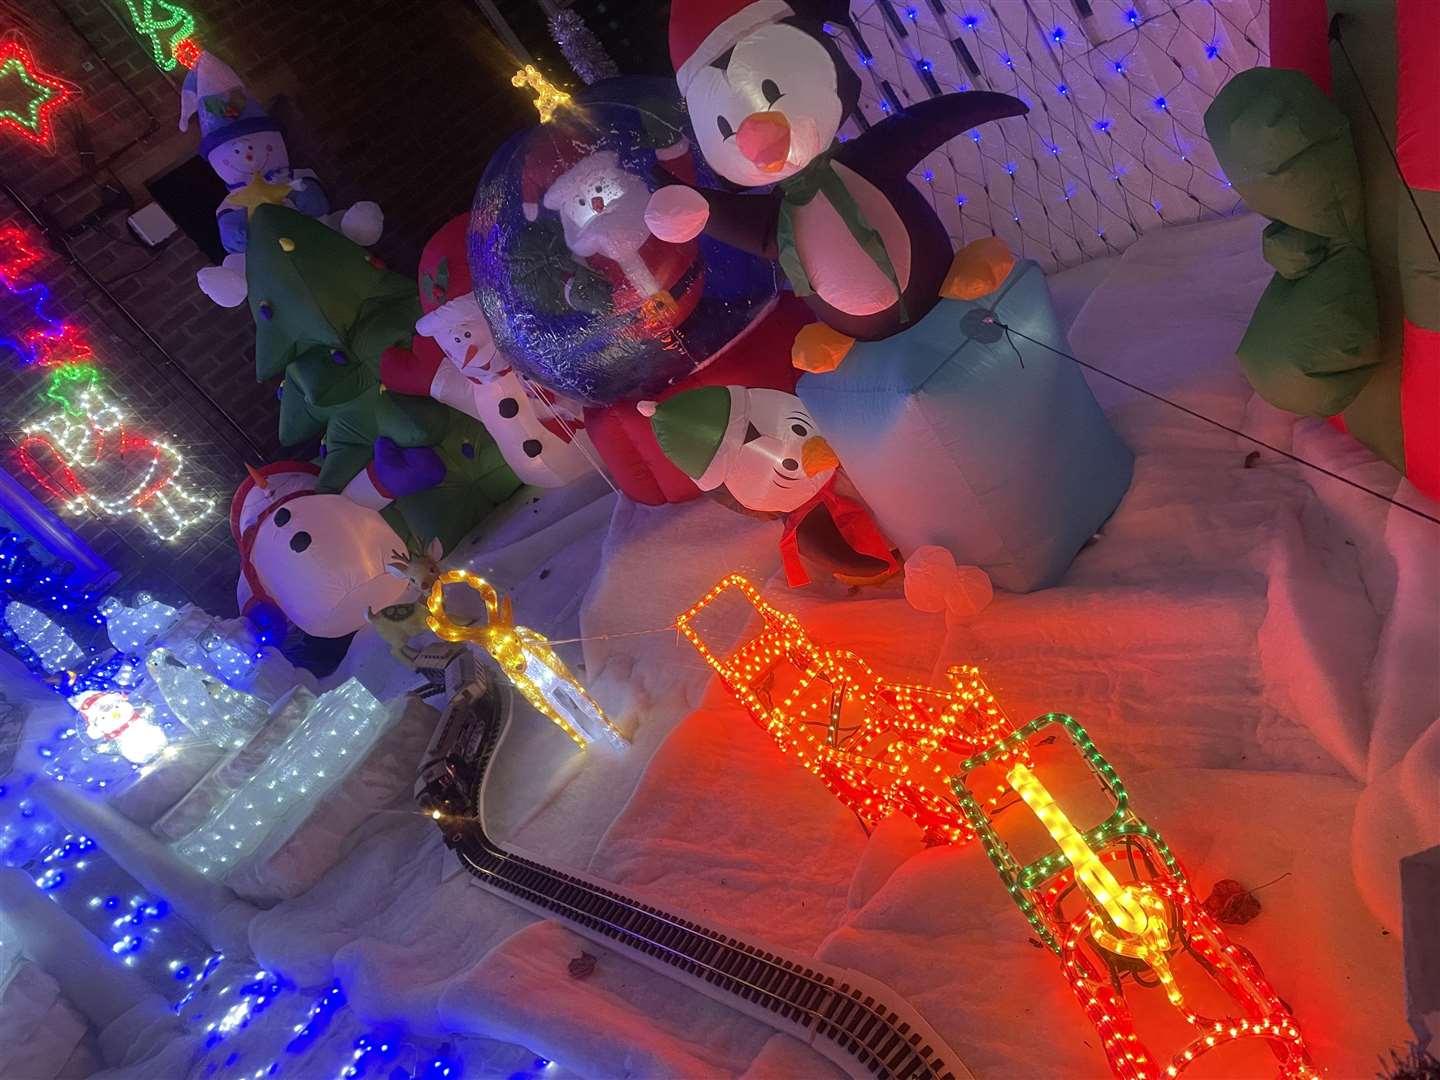 Paul and Lisa's Christmas decorations. Picture: Paul Matthews